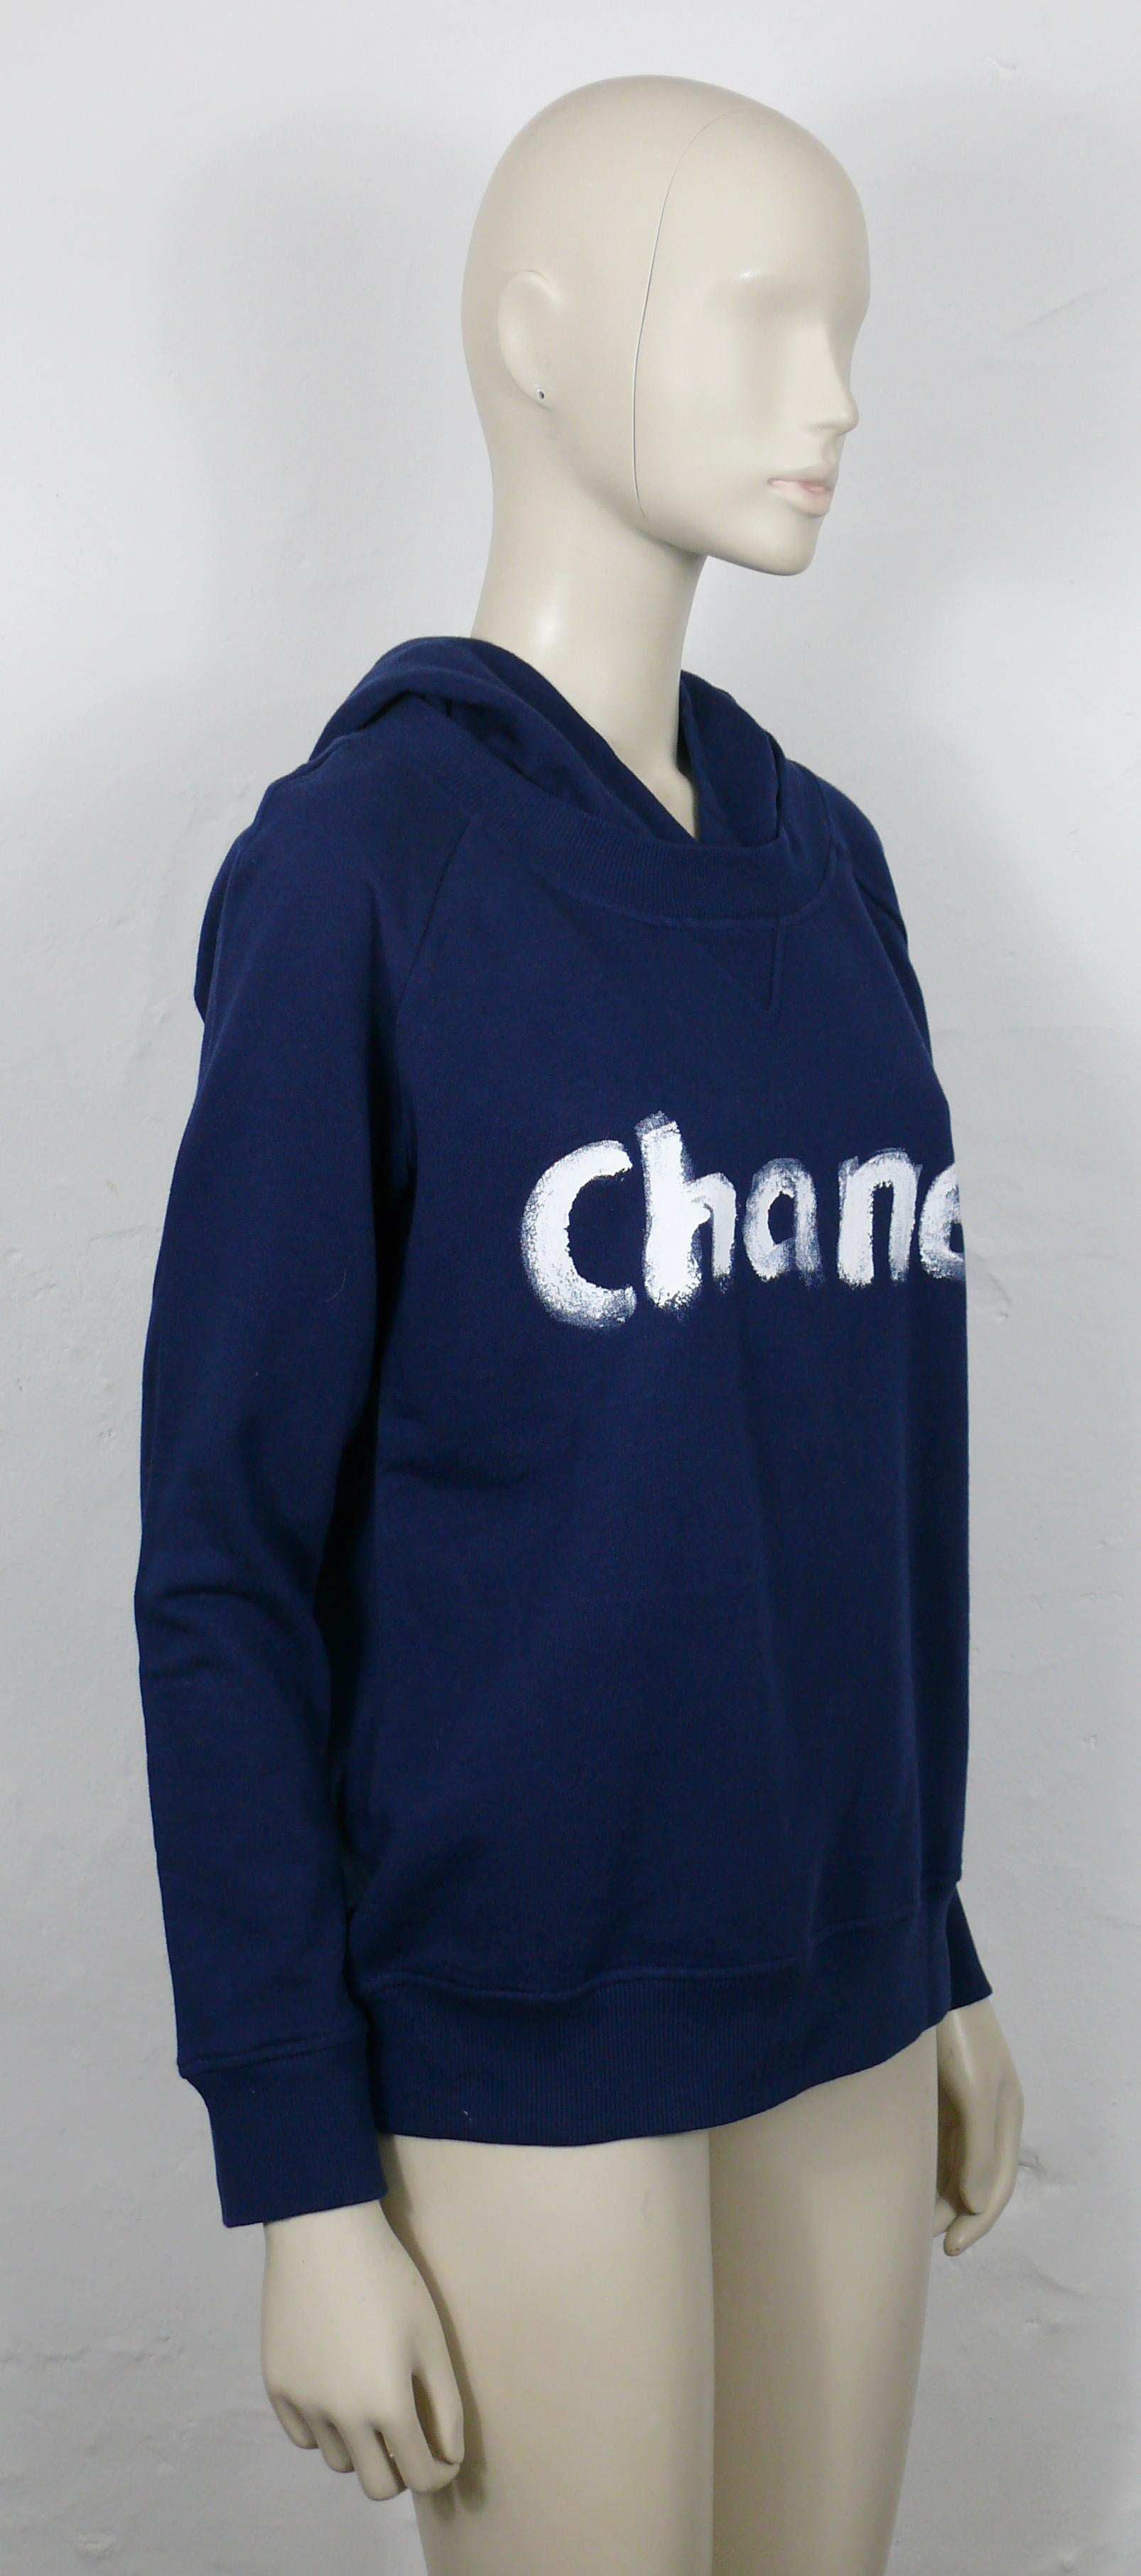 CHANEL Christmas 2013 VIPs Limited Edition Hooded Cotton Sweatshirt Size M For Sale 2